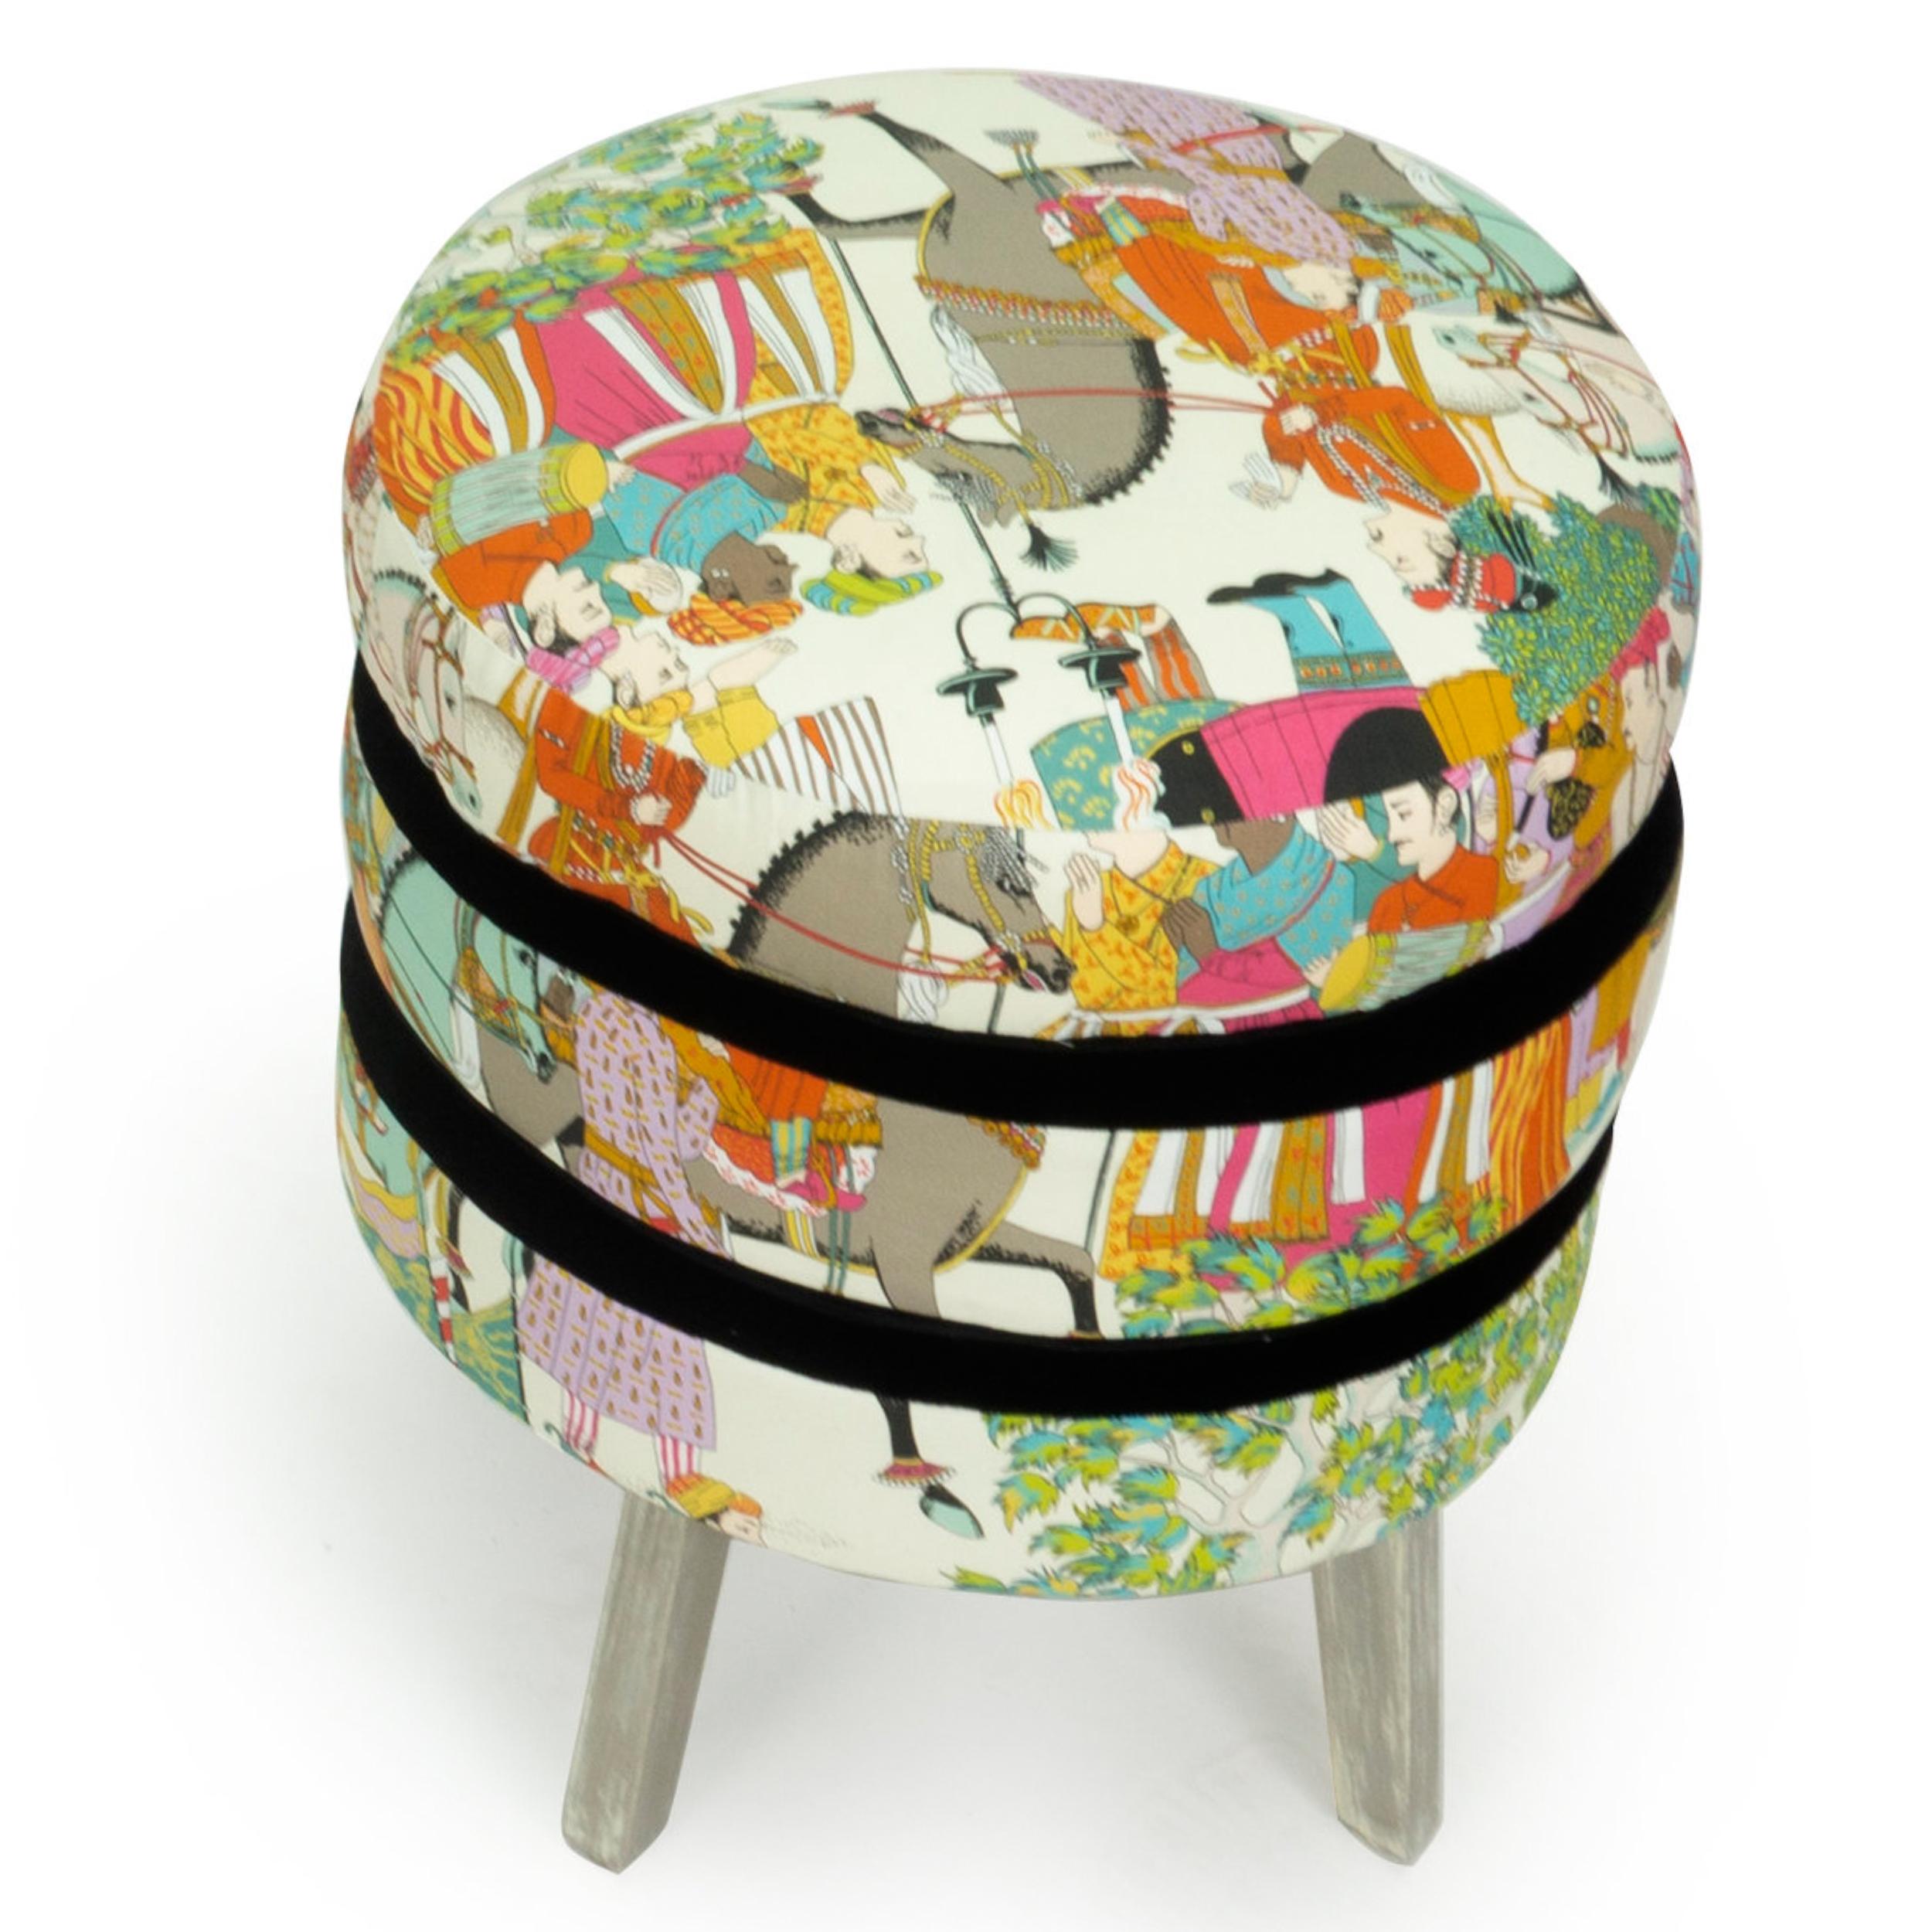 Our three layered ottoman stool features three layers of soft foam cushioning upholstered with an exotic toile fabric by Manuel Canovas with black velvet outlining. The legs are maple wood with a hand brushed painted finish. This piece can be made